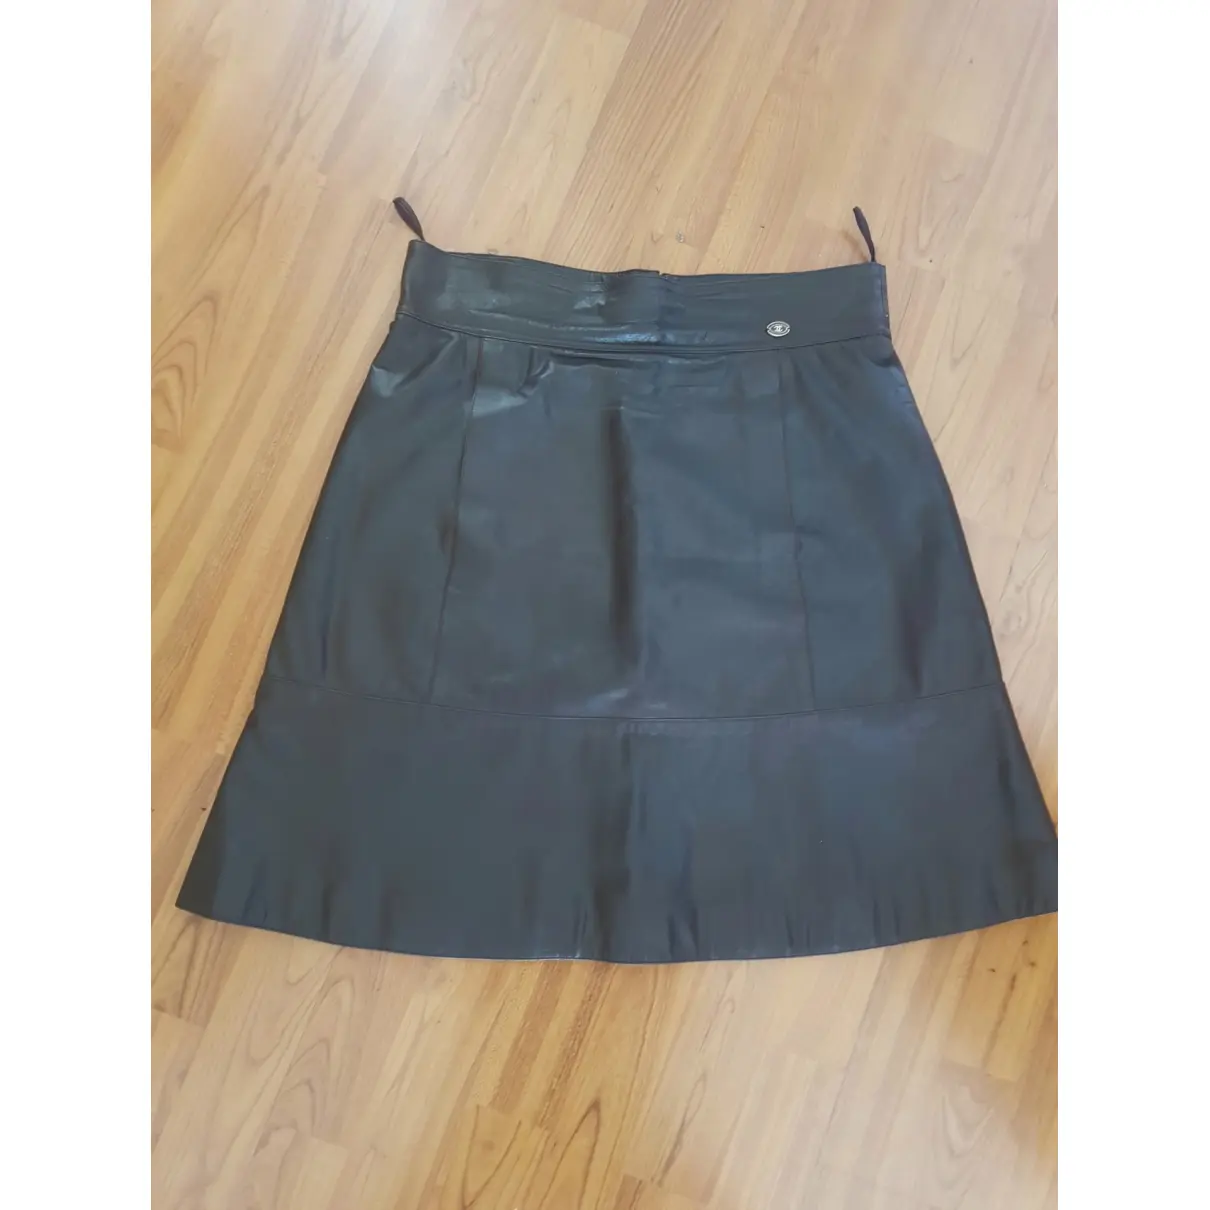 Buy Chanel Leather skirt online